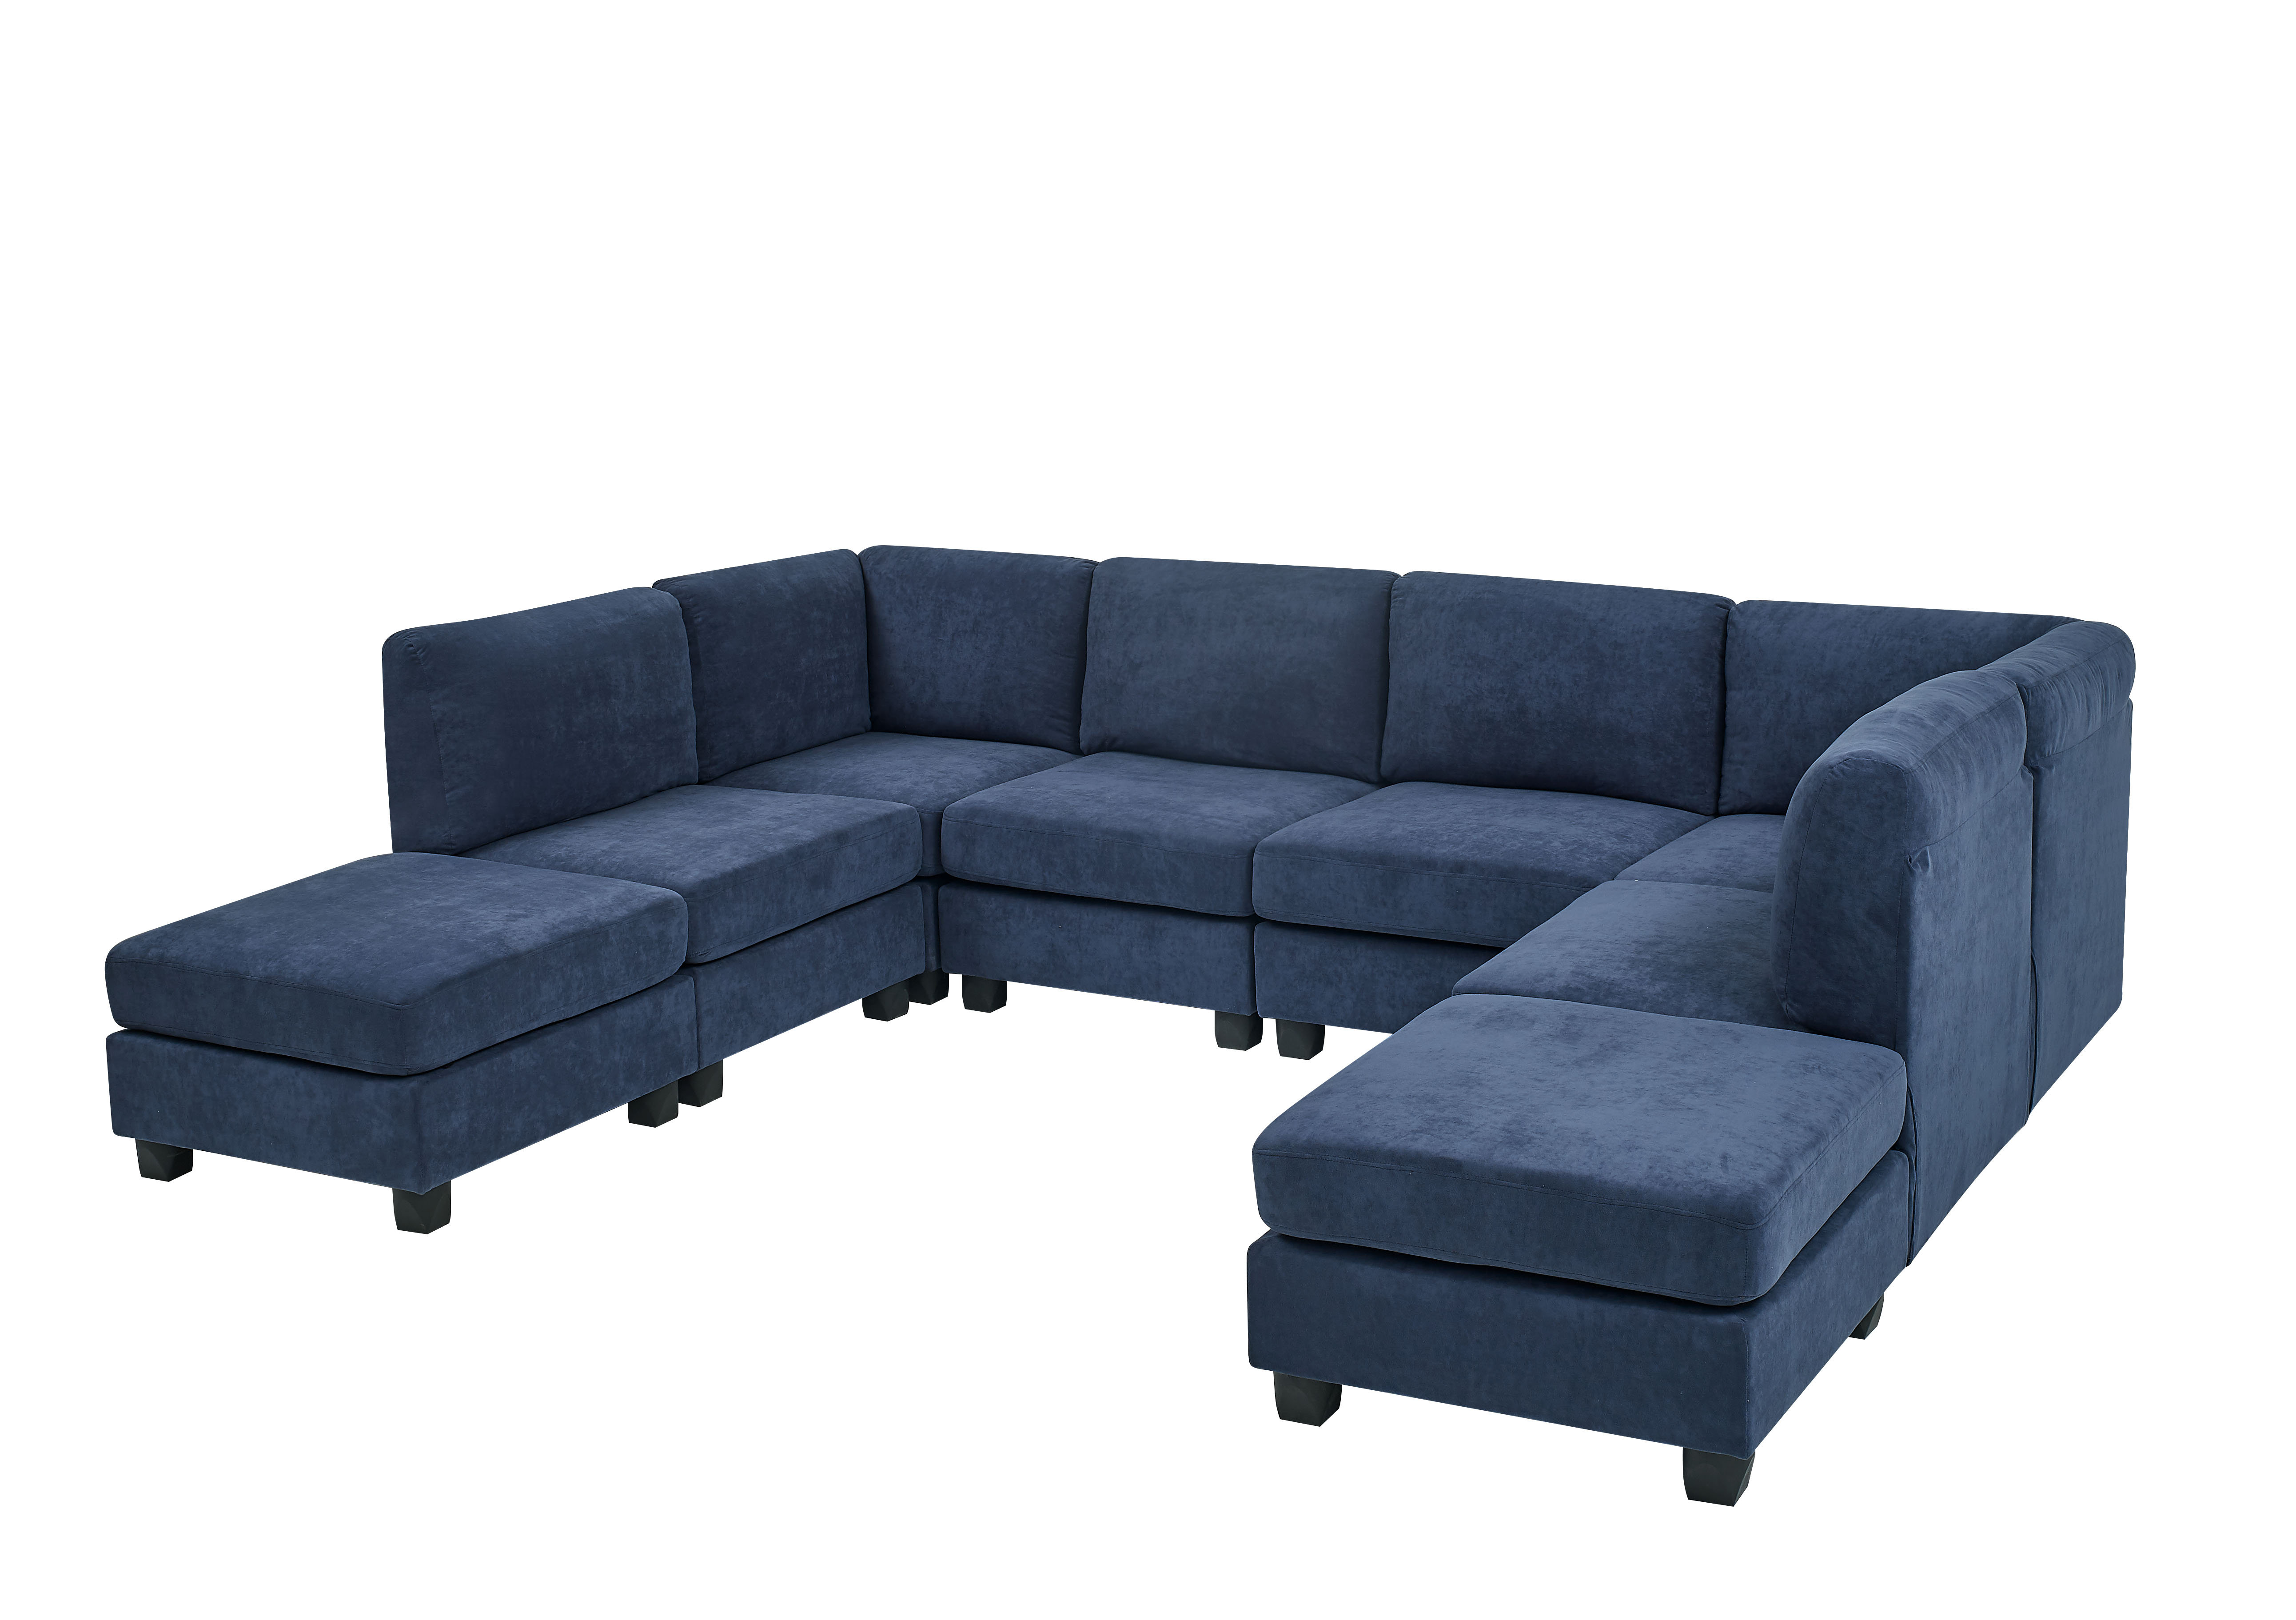 Dawnelle 120″ Wide Symmetrical Modular Sectional with Ottoman